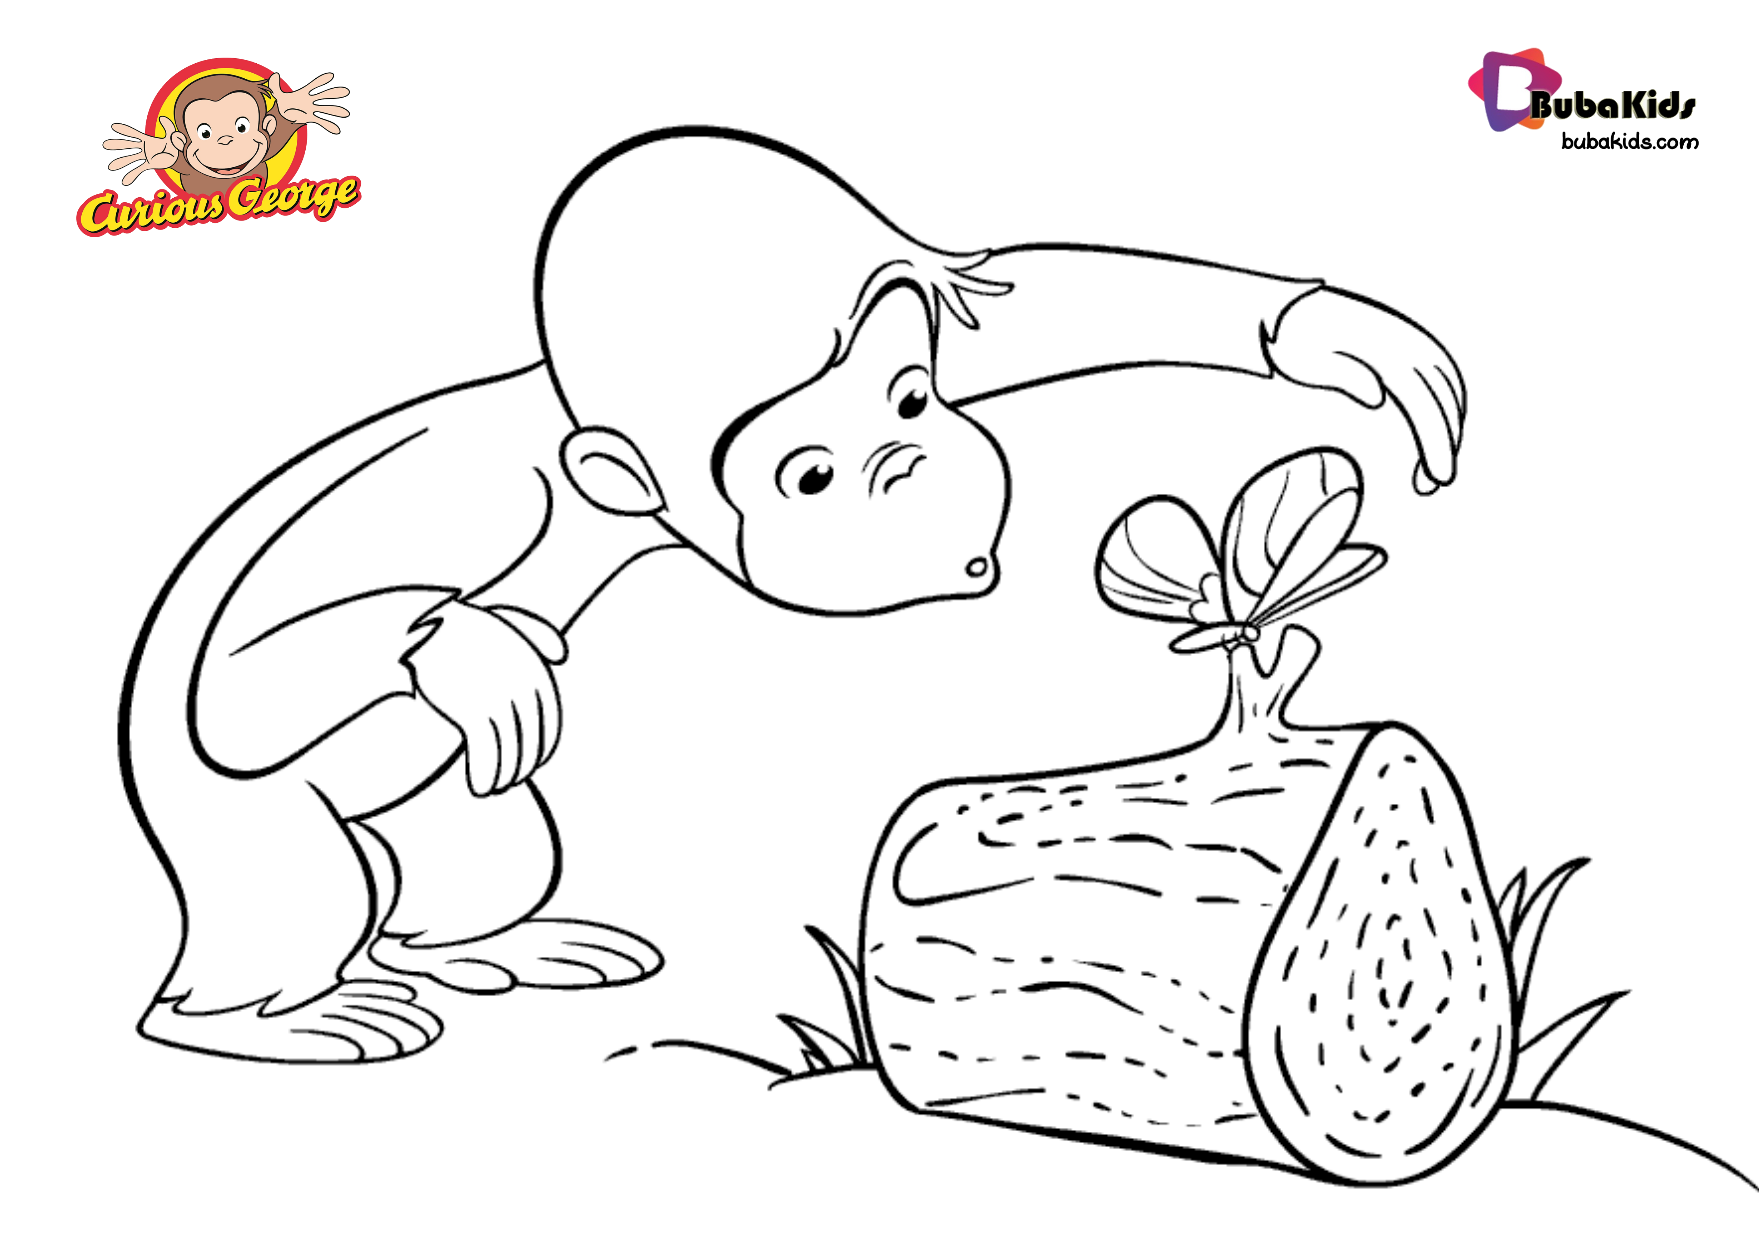 Free download to print curious george coloring page Wallpaper